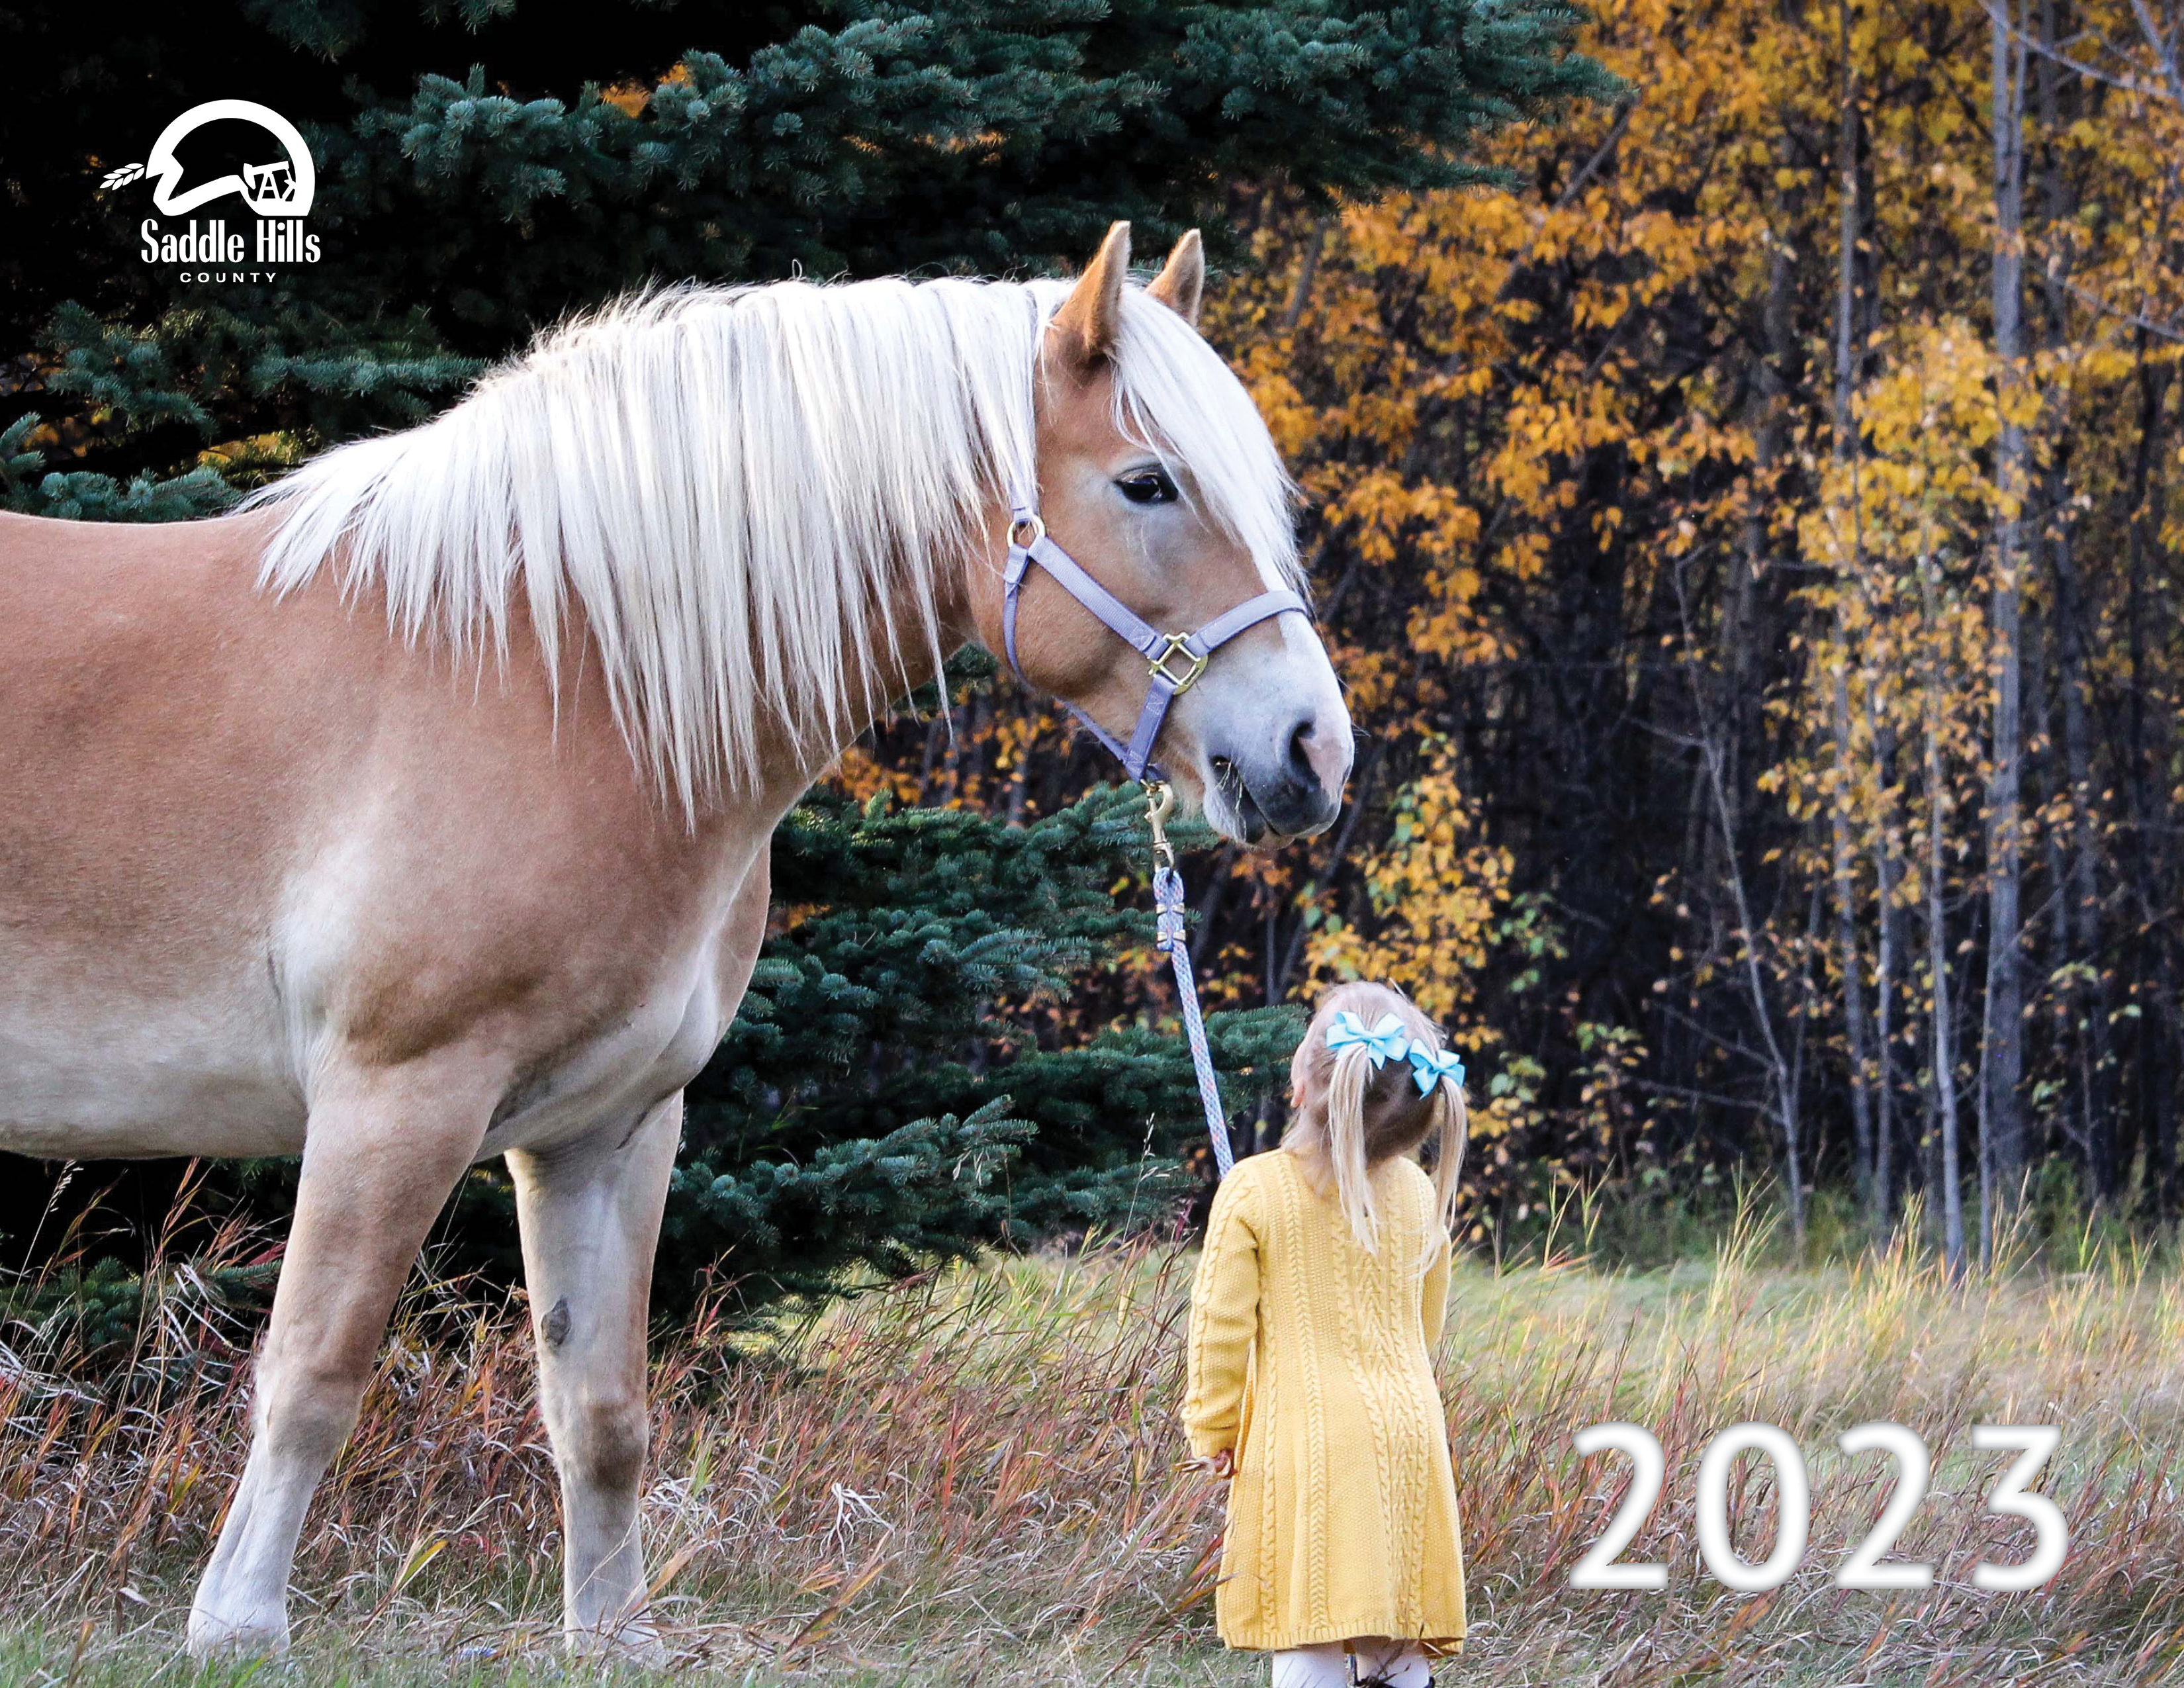 Image of Girl and Horse